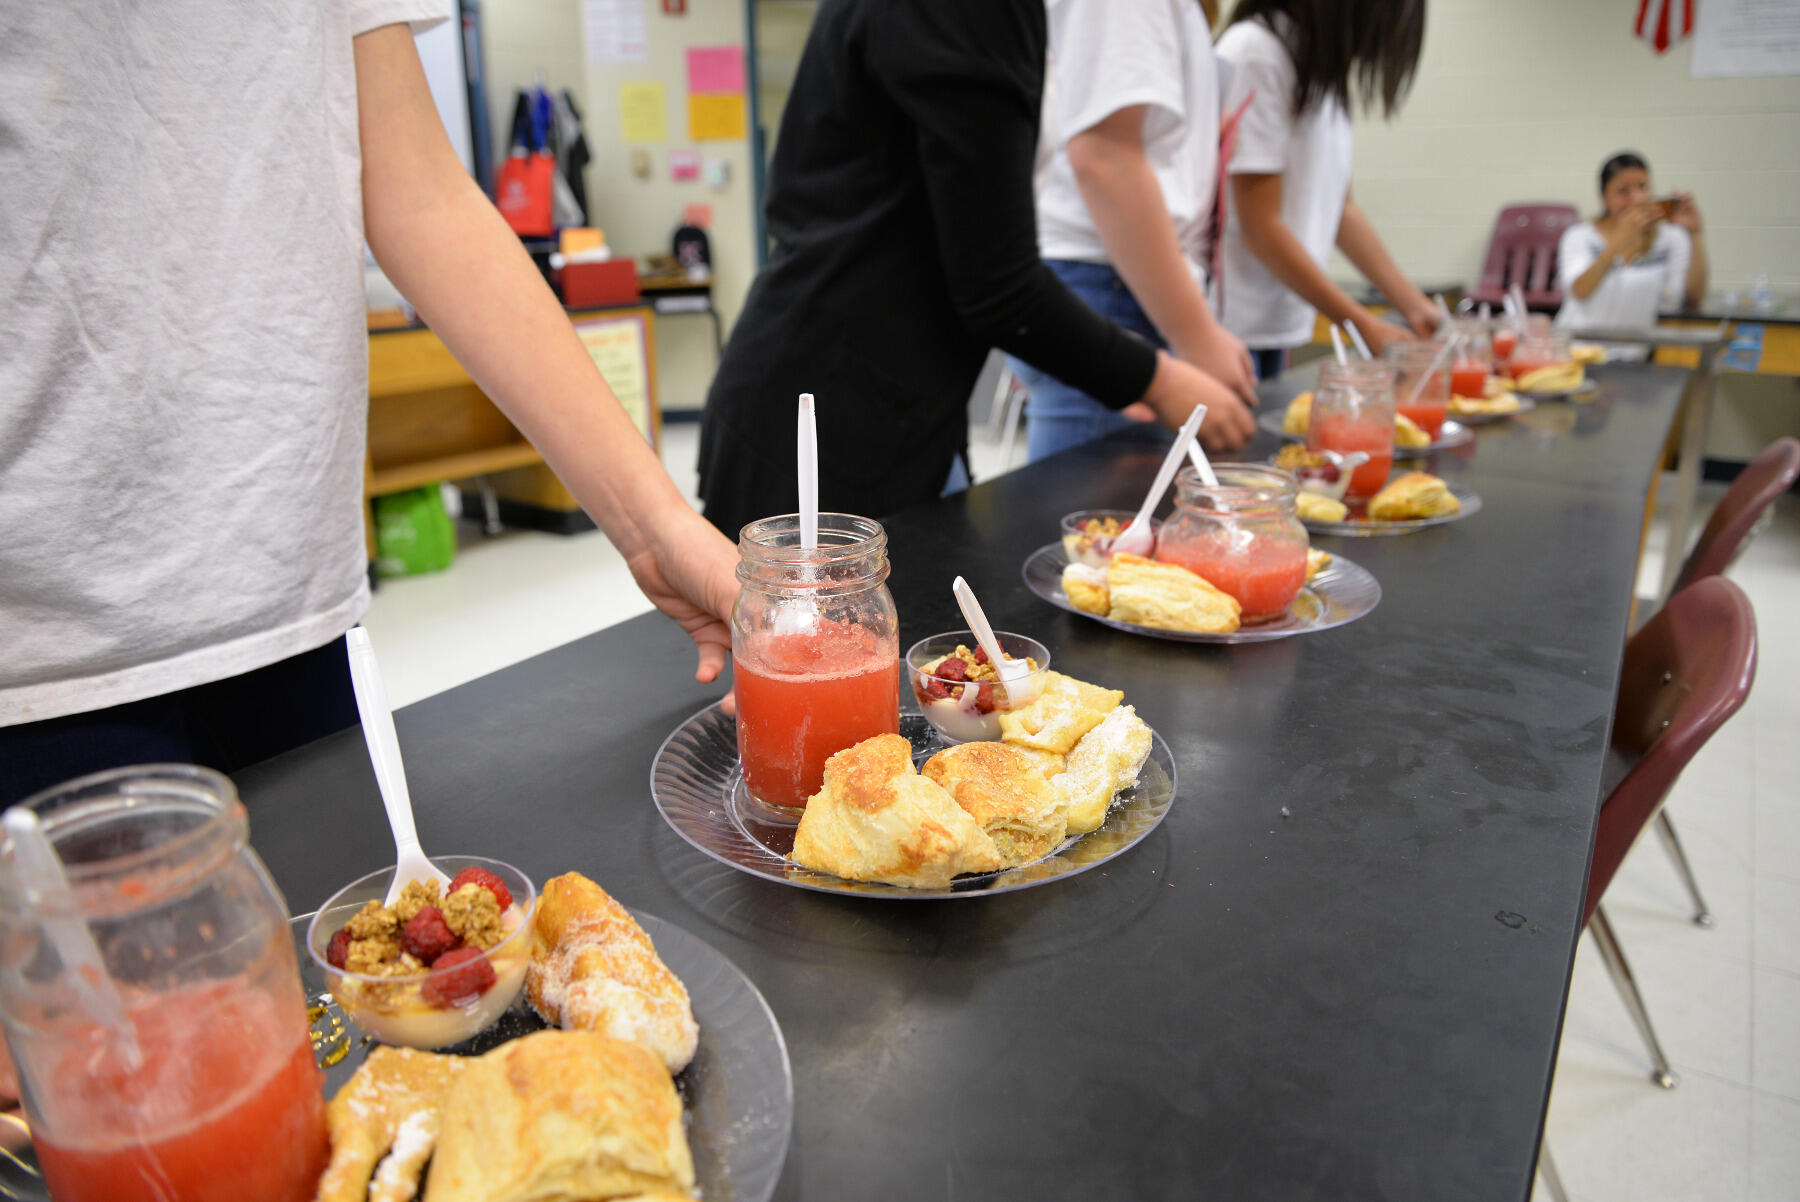 One team, "Round the Block," brought samples of desserts they prepared, including a watermelon lime agua fresca and Cuban and Polish baked goods.
